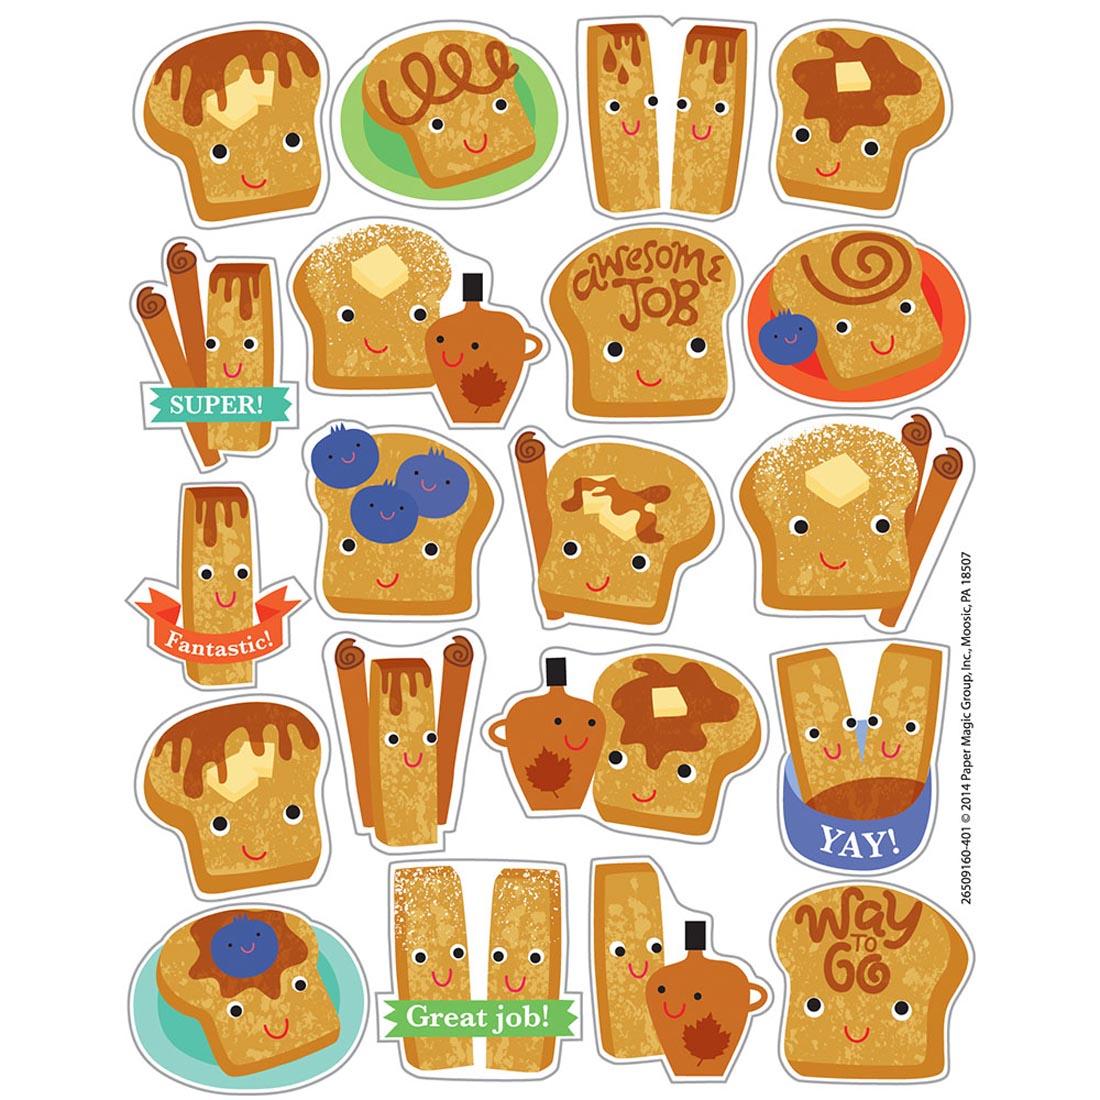 Toast and Cinnamon Sticks are pictured on Cinnamon Scented Stickers by Eureka